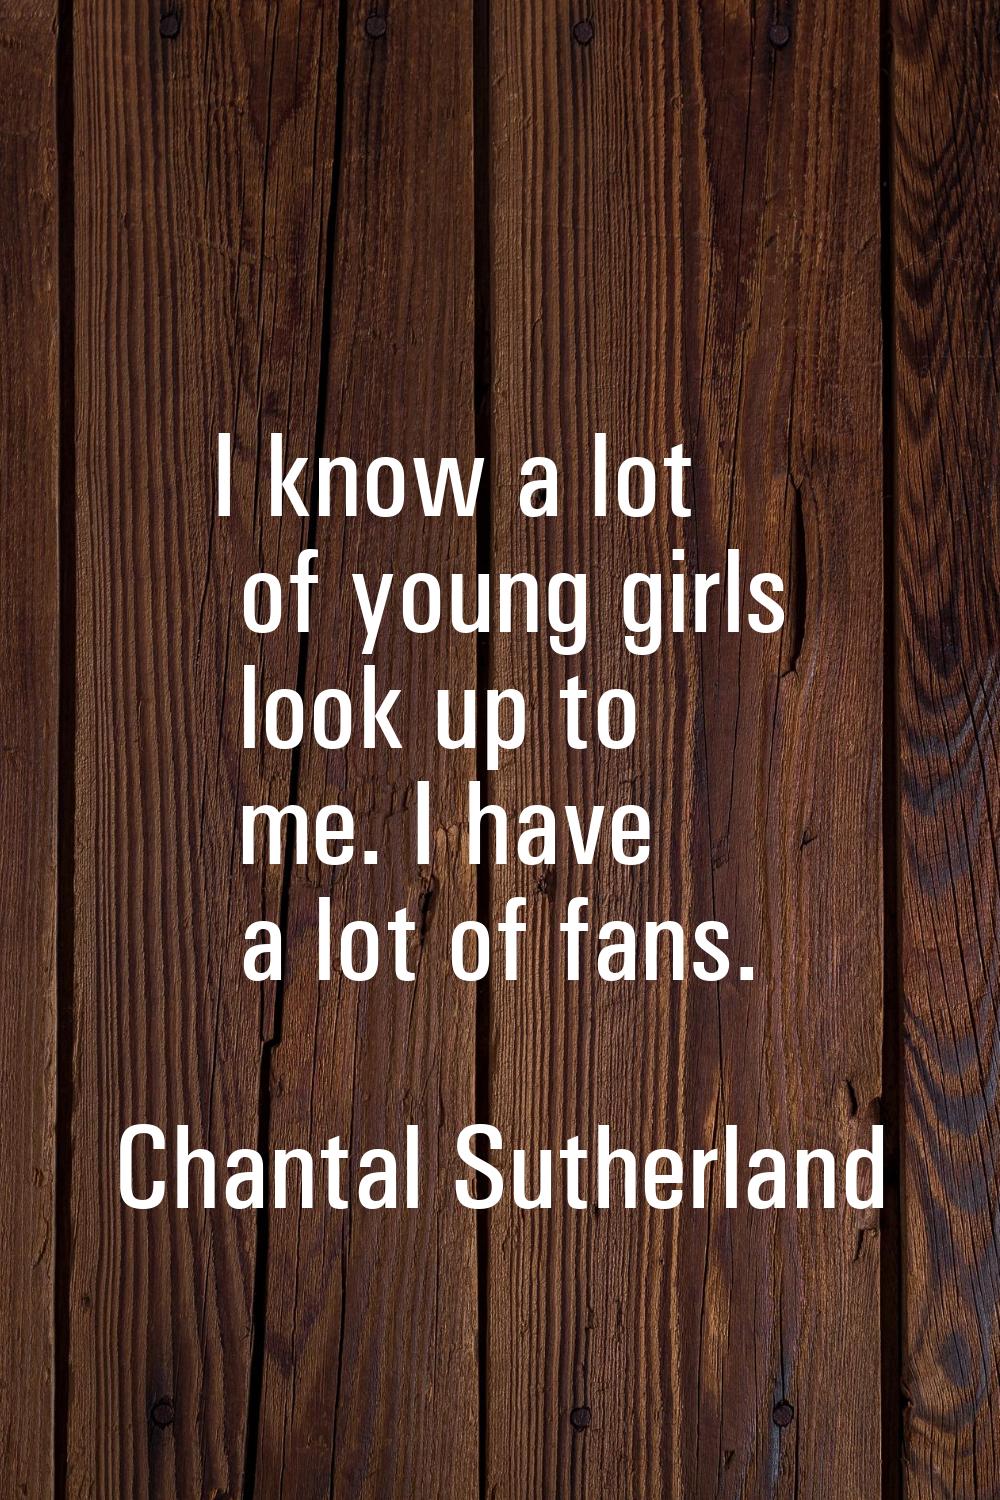 I know a lot of young girls look up to me. I have a lot of fans.